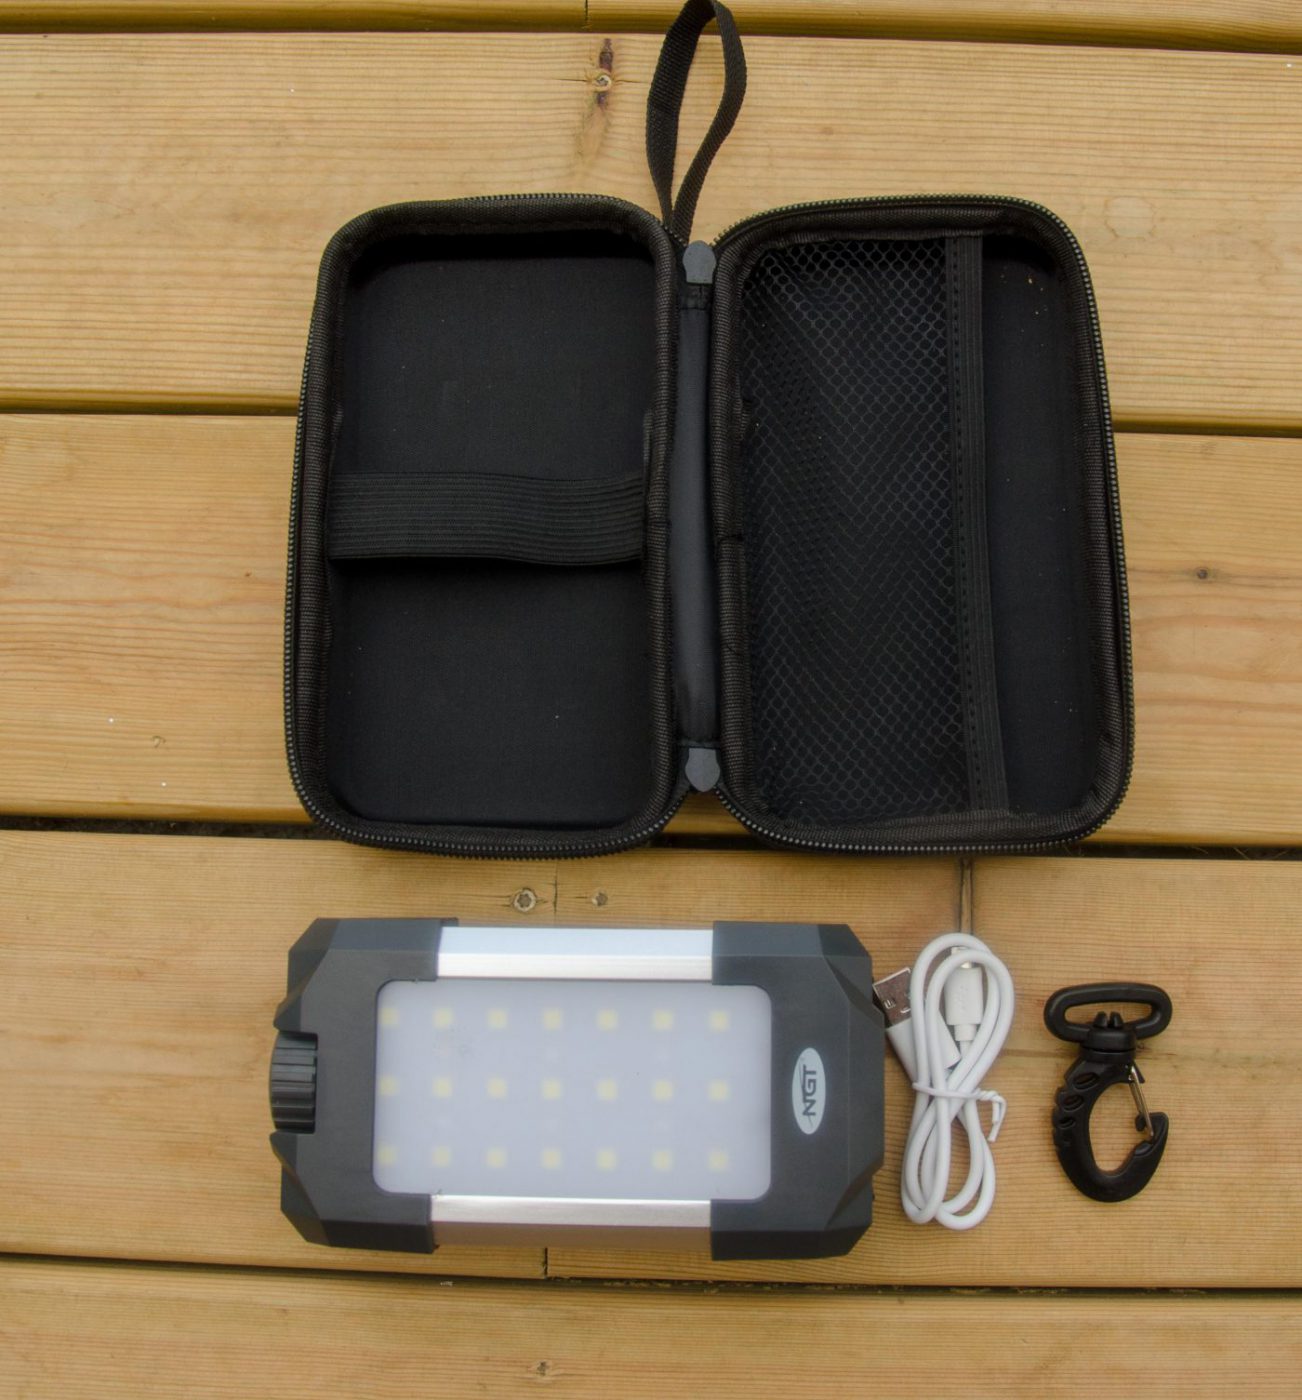 NGT Floodlight and Power Bank System